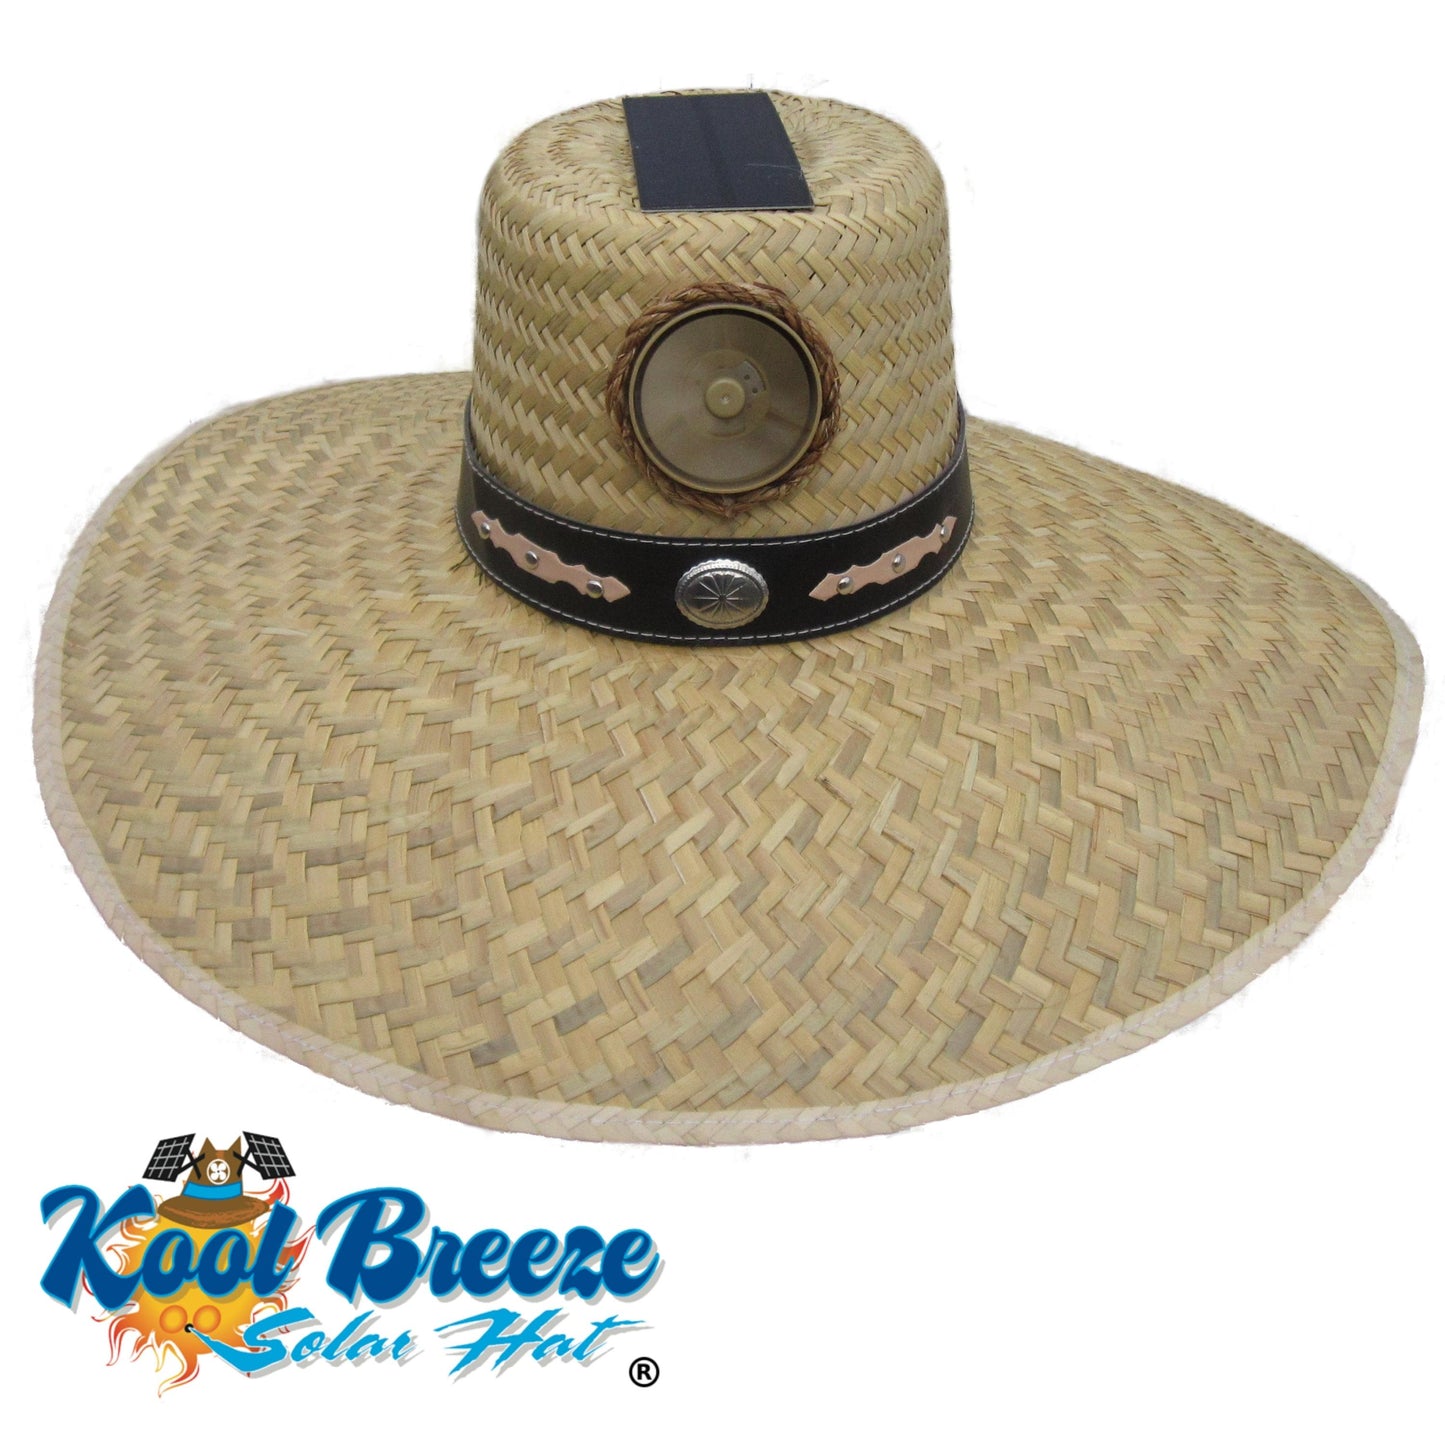 Men's Gardener with Band Solar Hat - Sun Hat with Fan, One Size